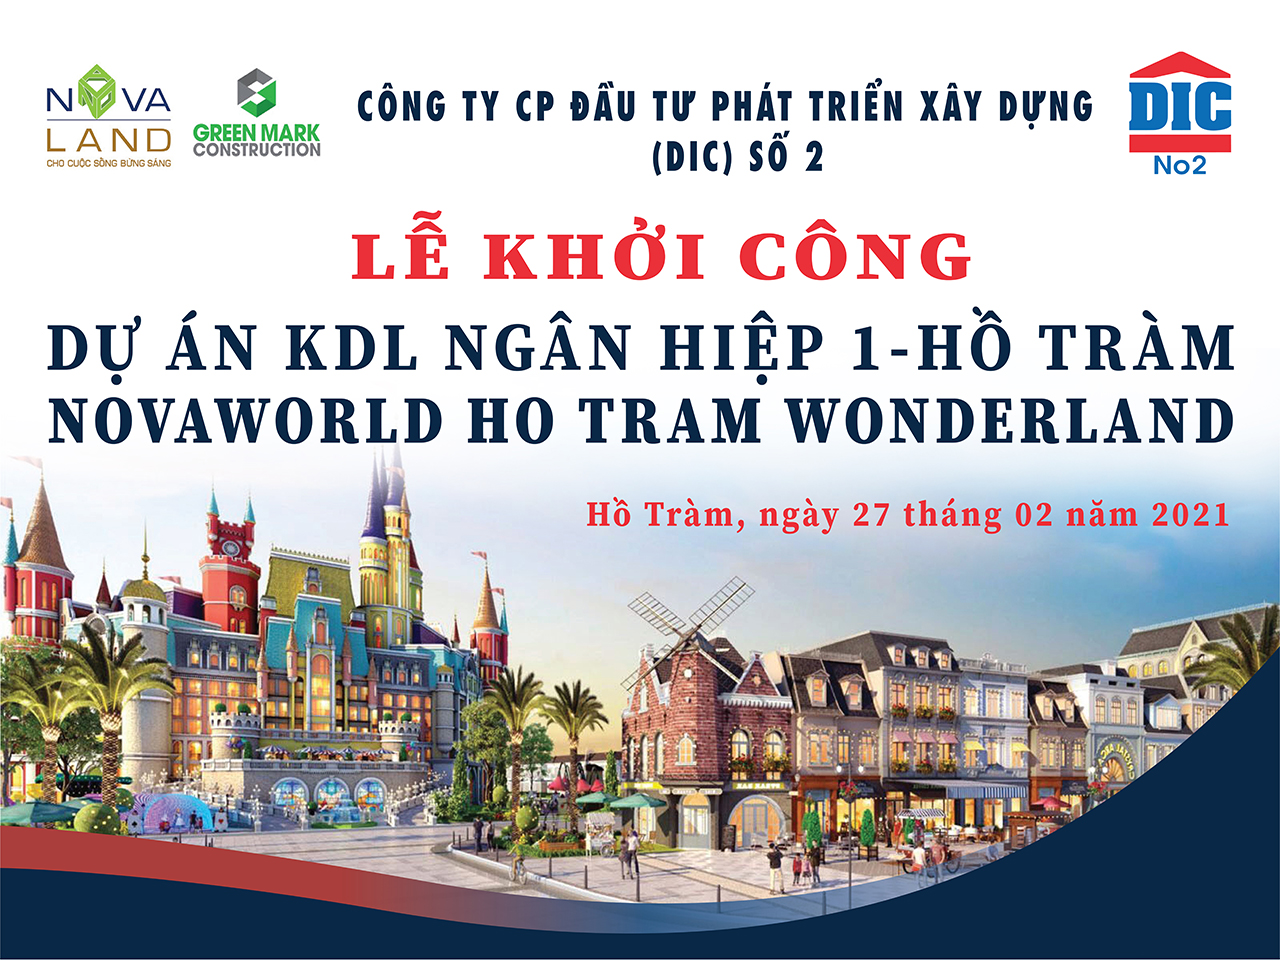 COMMENCEMENT OF CONSTRUCTION CEREMONY OF  NGAN HIEP 1 – HO TRAM TOURIST AREA